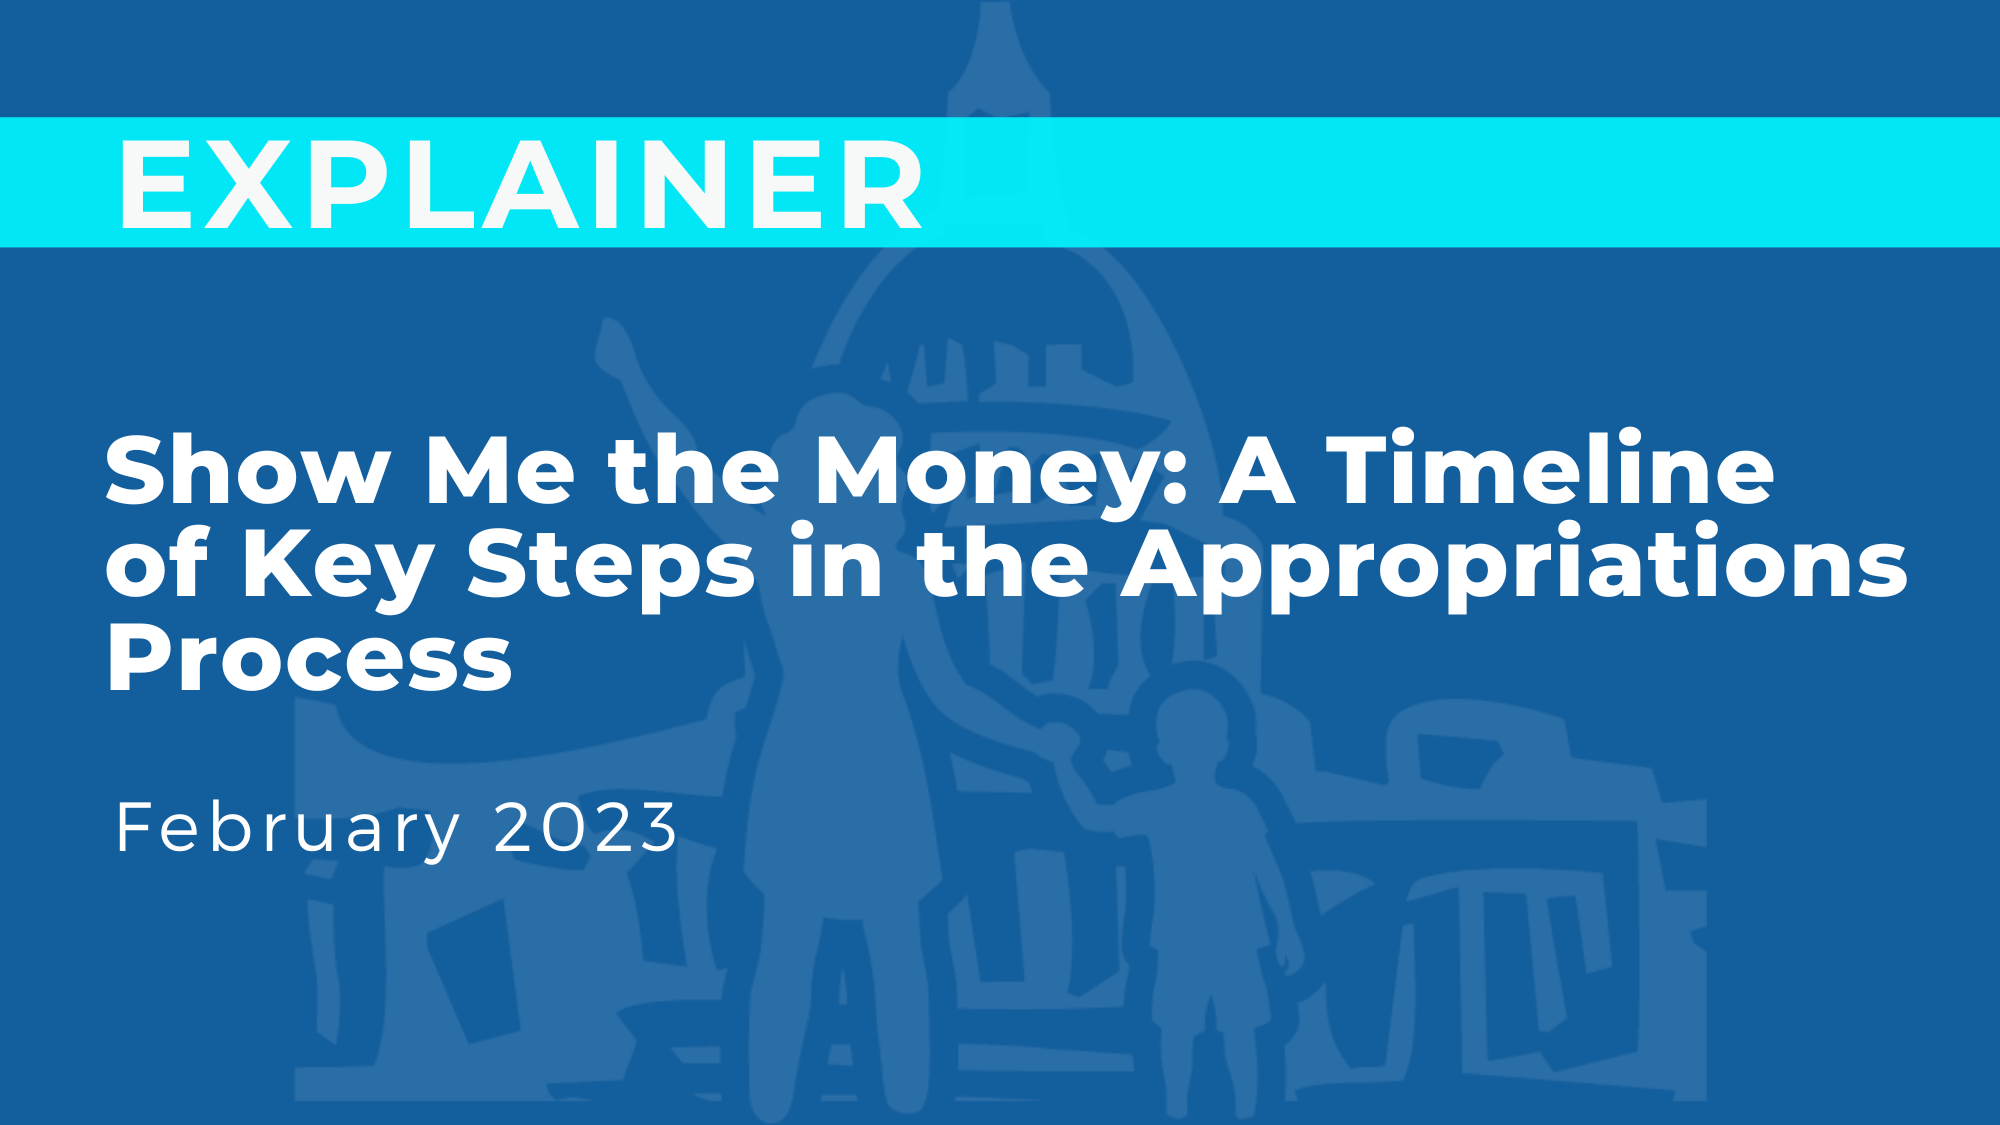 Show Me the Money: A Timeline of Key Steps in the Appropriations Process